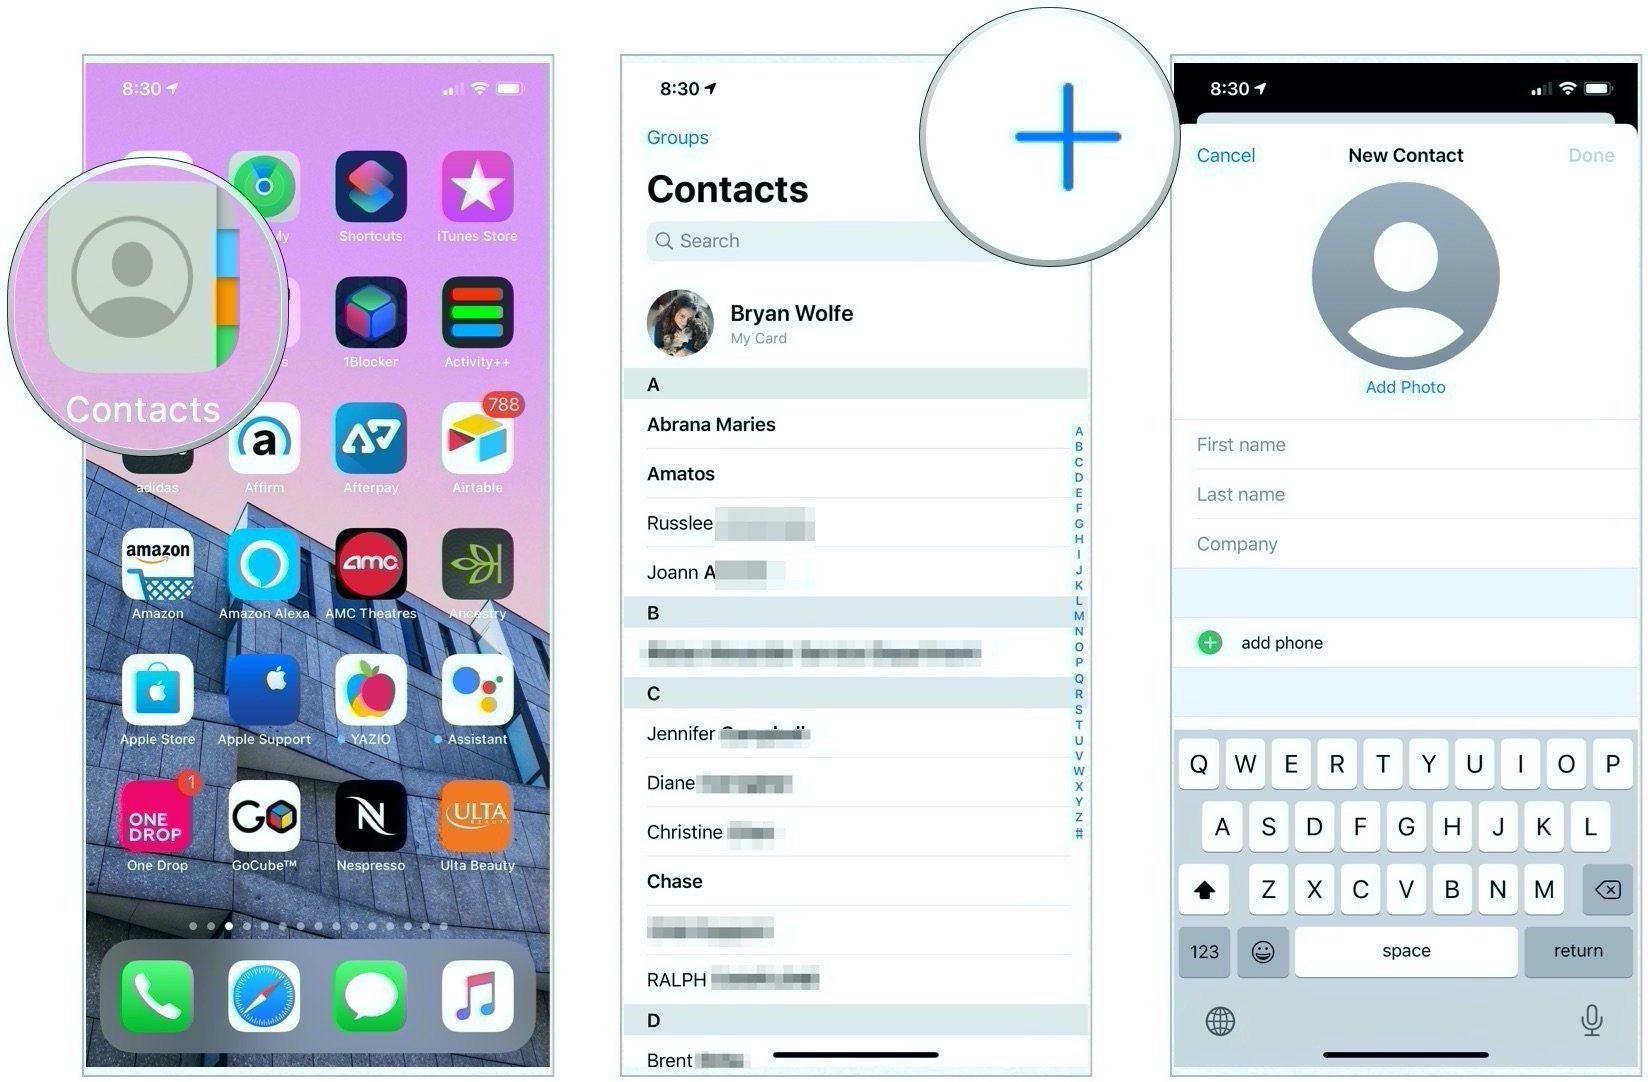 How to add a contact on iPhone and iPad: Open the Contacts app, tap on the plus sign on the plus sign. Add the necessary information for your new contact